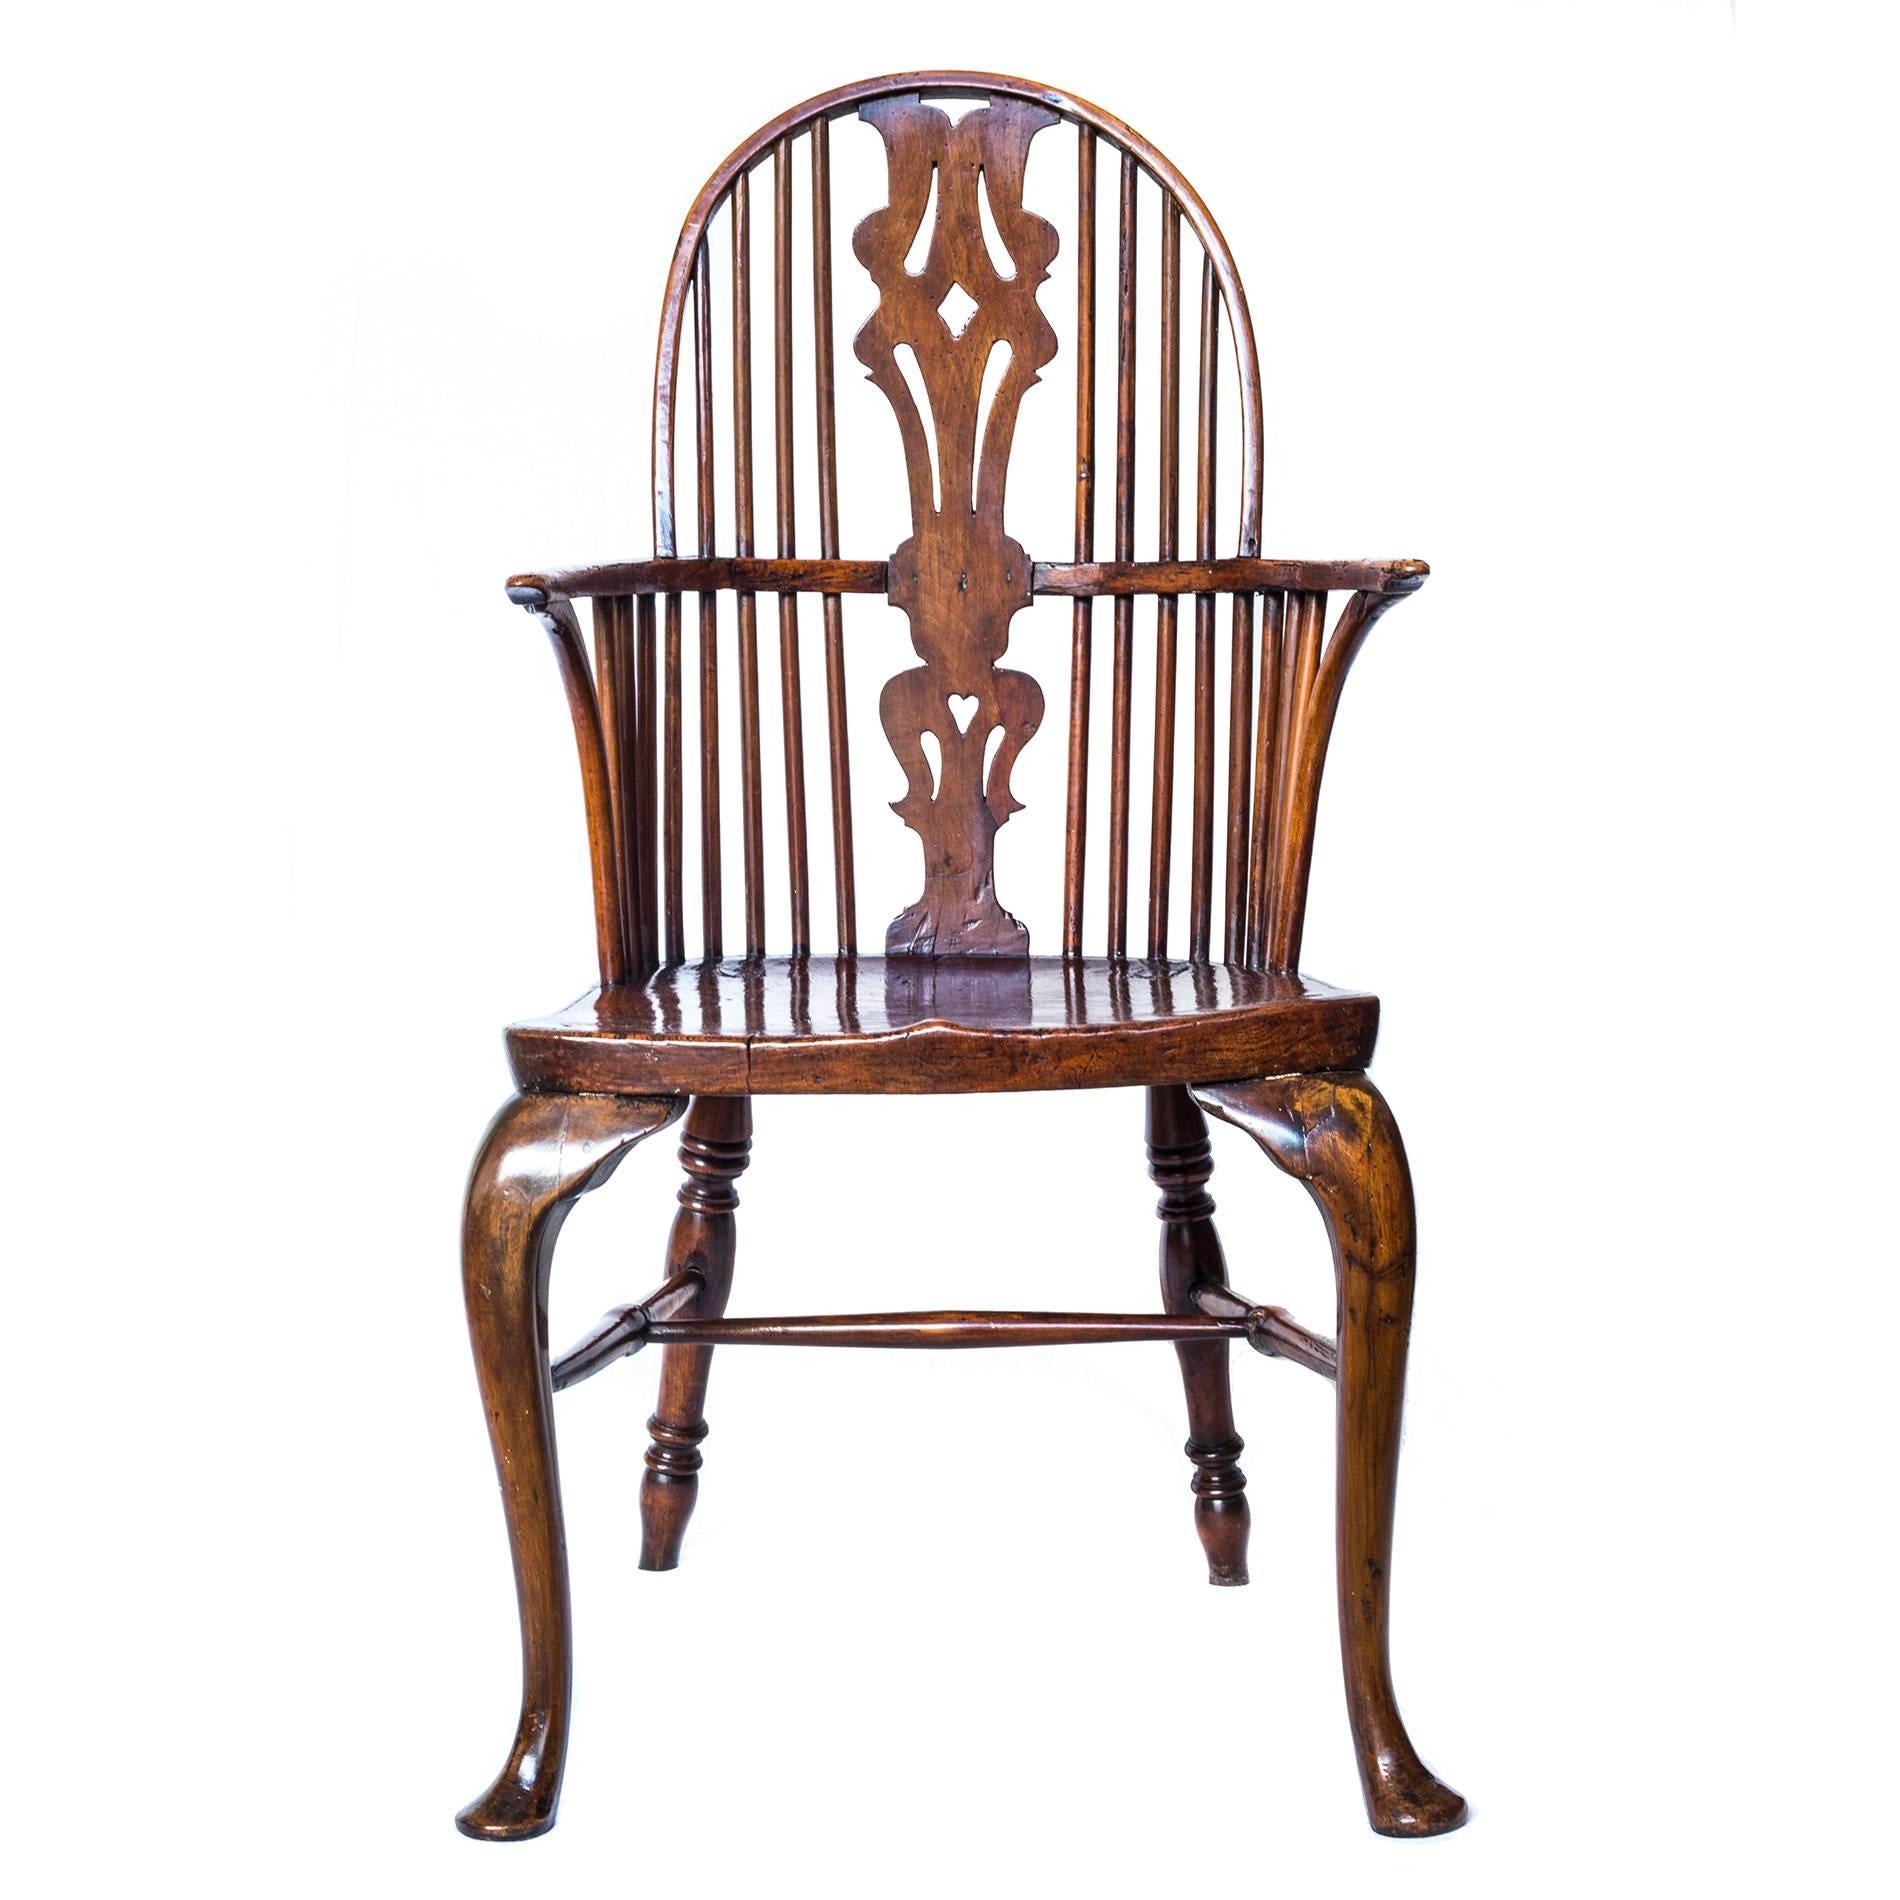 An attractive mid-18th century George III period Elm, Ash and Walnut Windsor high-back armchair.

English, Thames Valley, c. 1760

The double bow back with pierced Chippendale inspired central splat, arms with inswept front supports, over